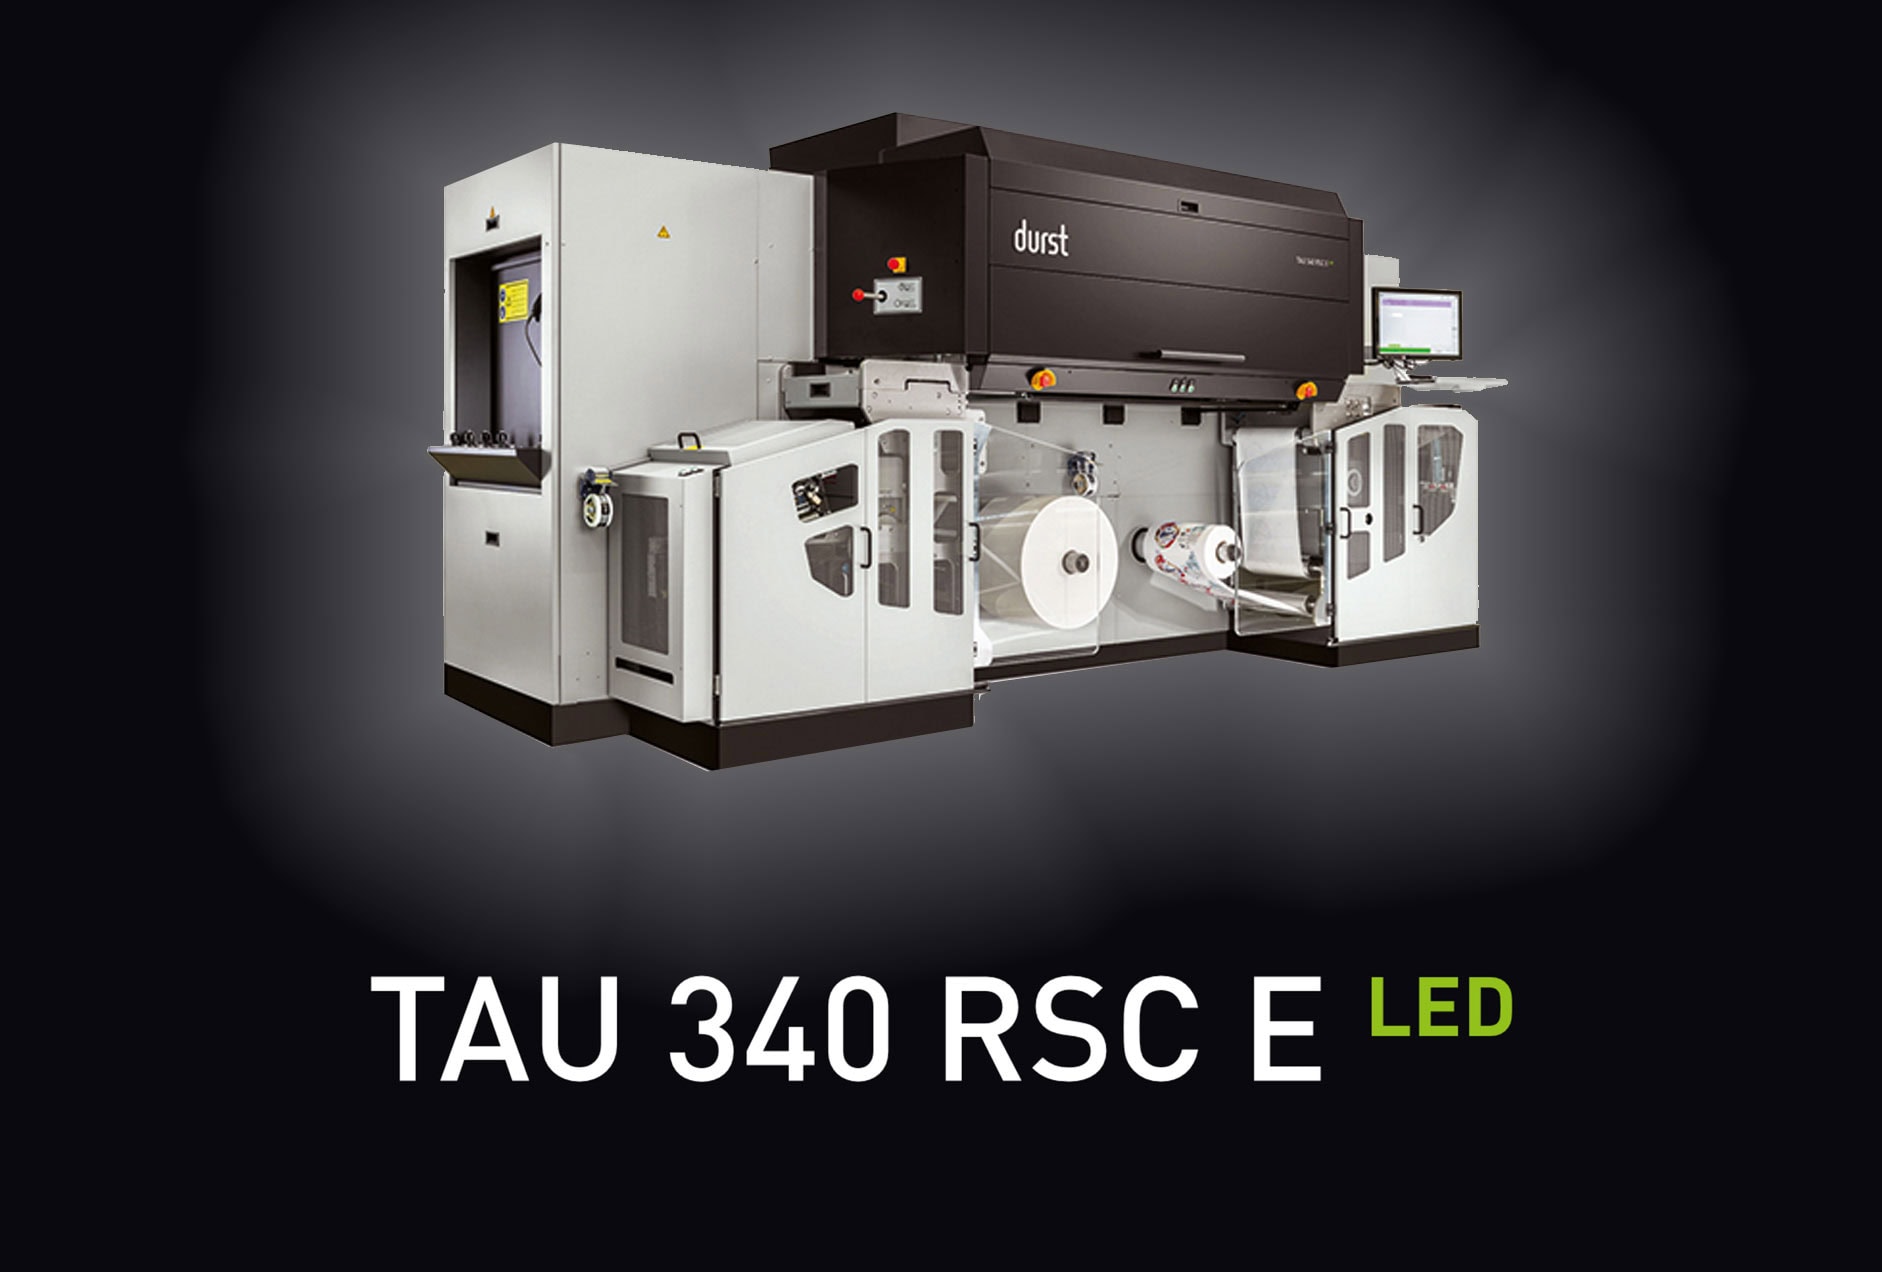 amazing labels print services in newzeland fast and quality labels new tau rsc 340e machine 1